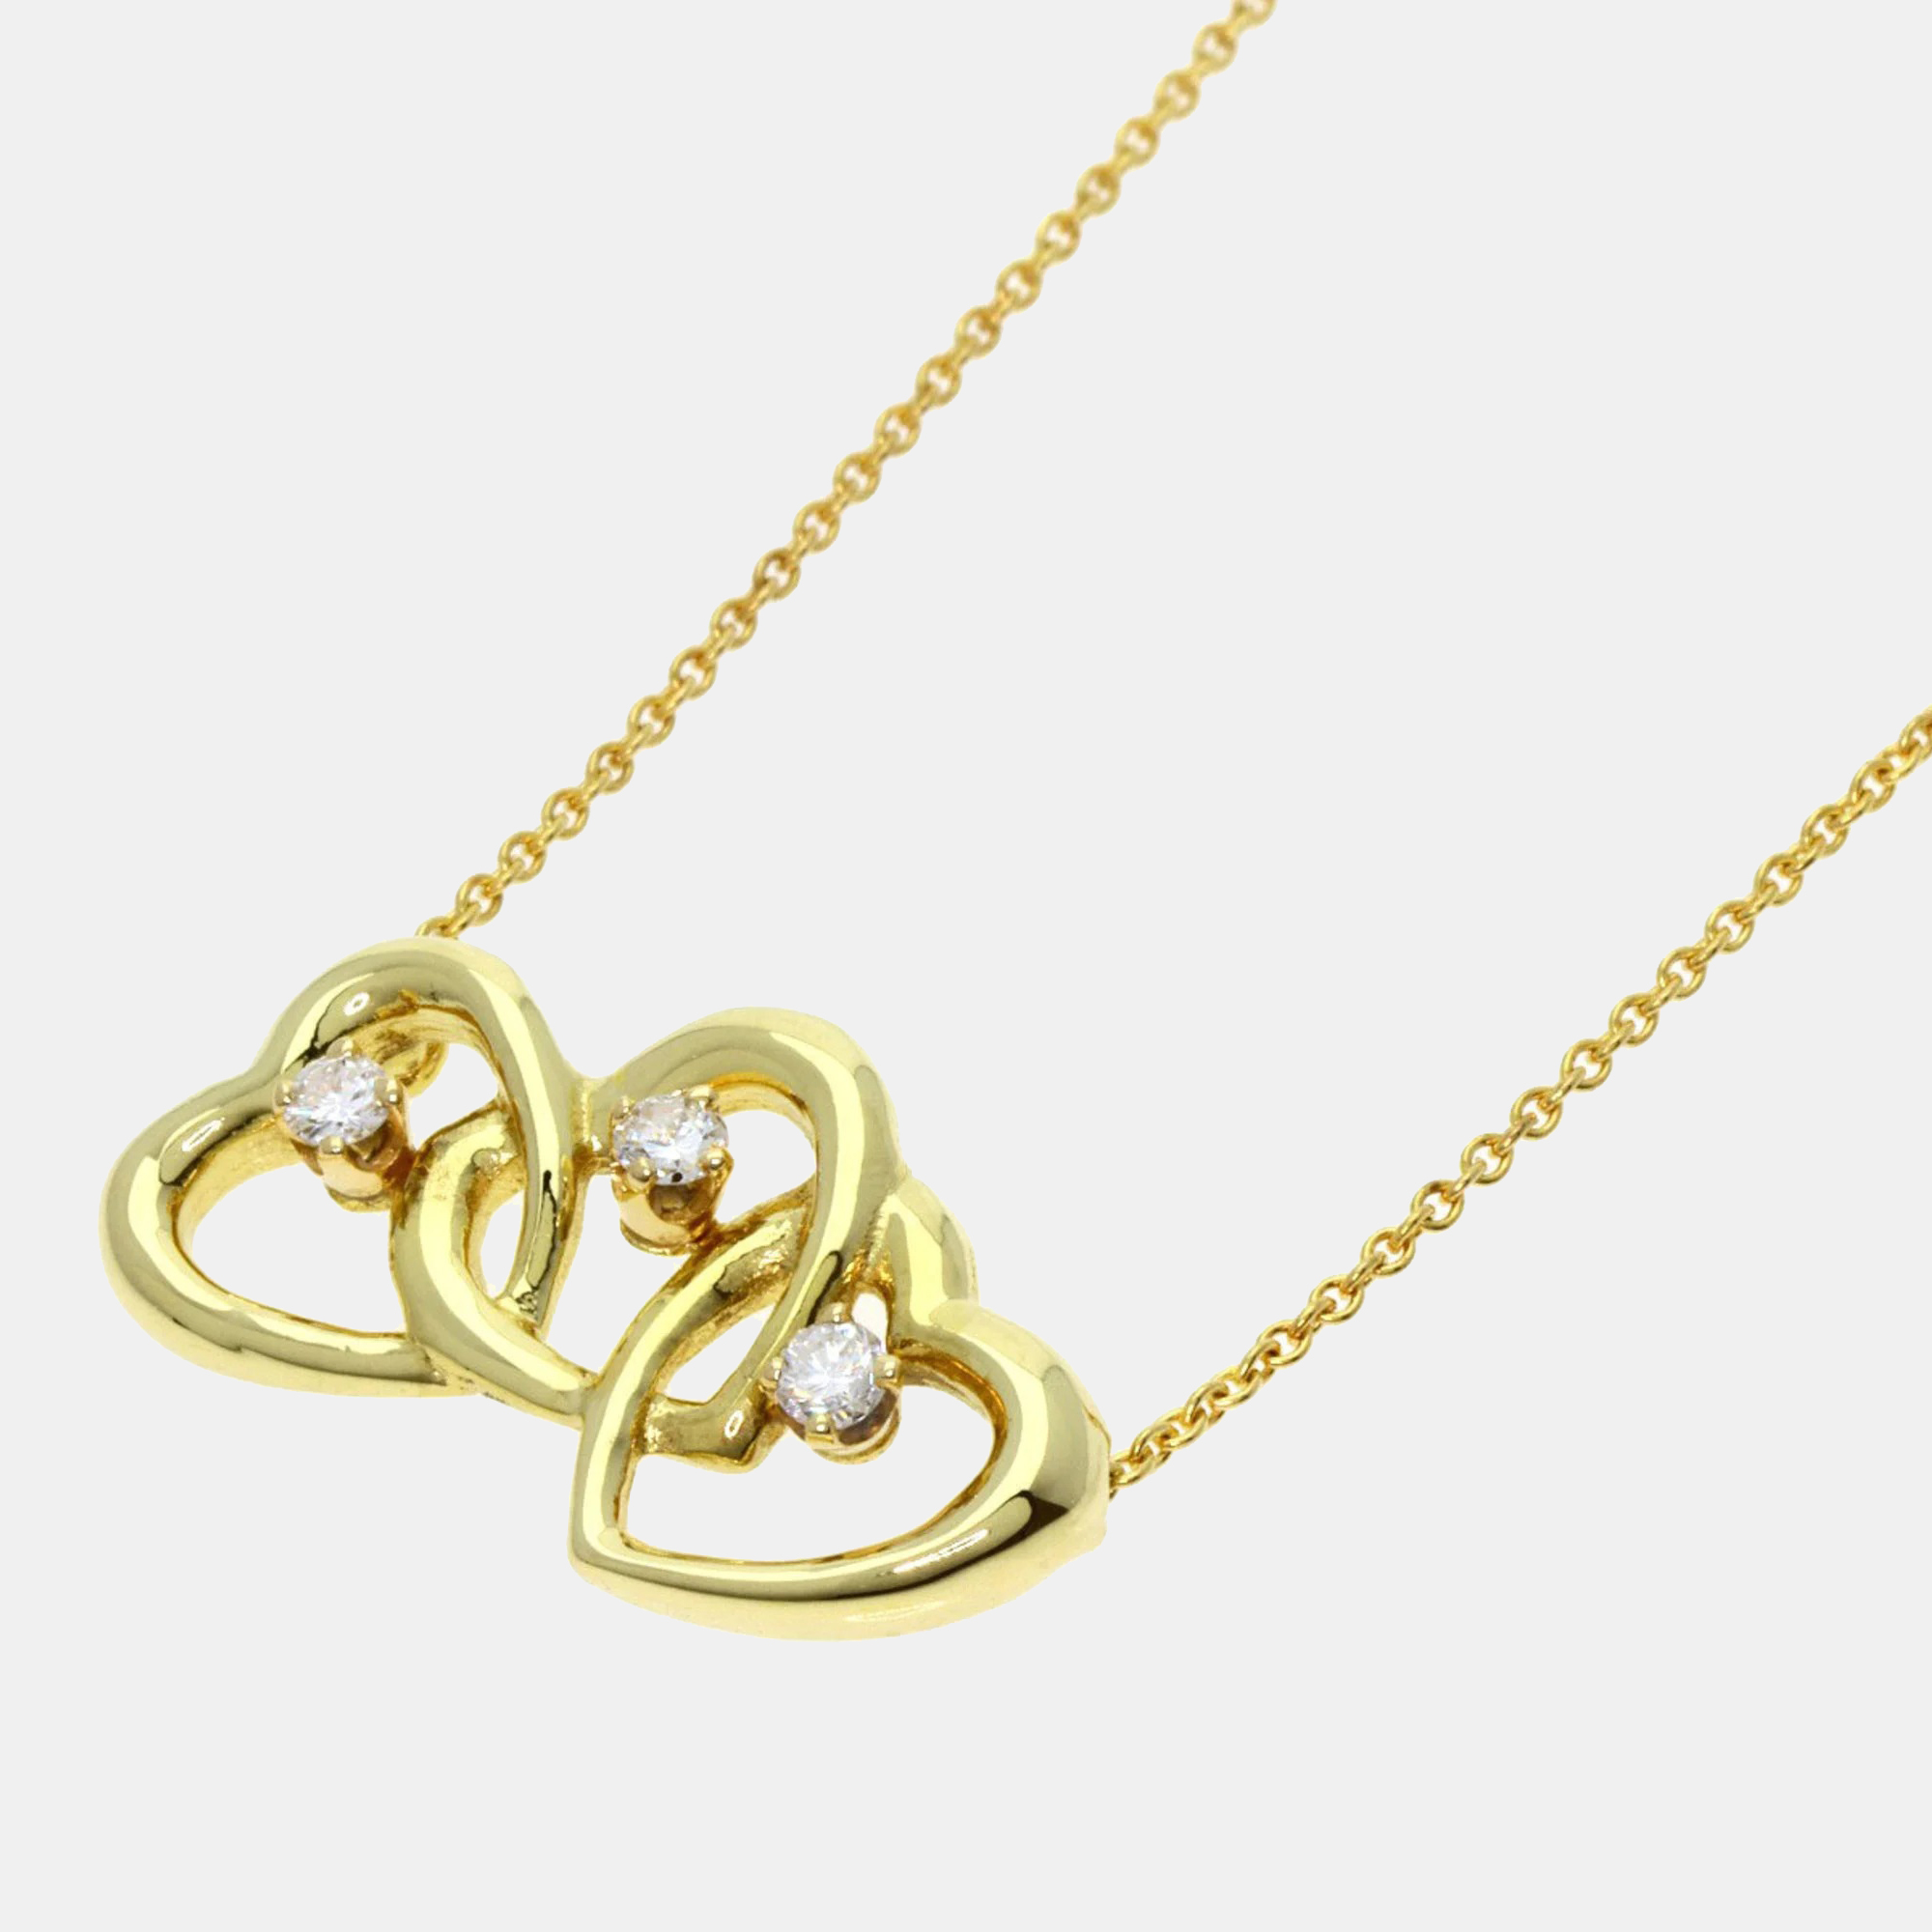 Tiffany & Co. 18K Yellow Gold And Diamond Triple Heart Pendant Necklace